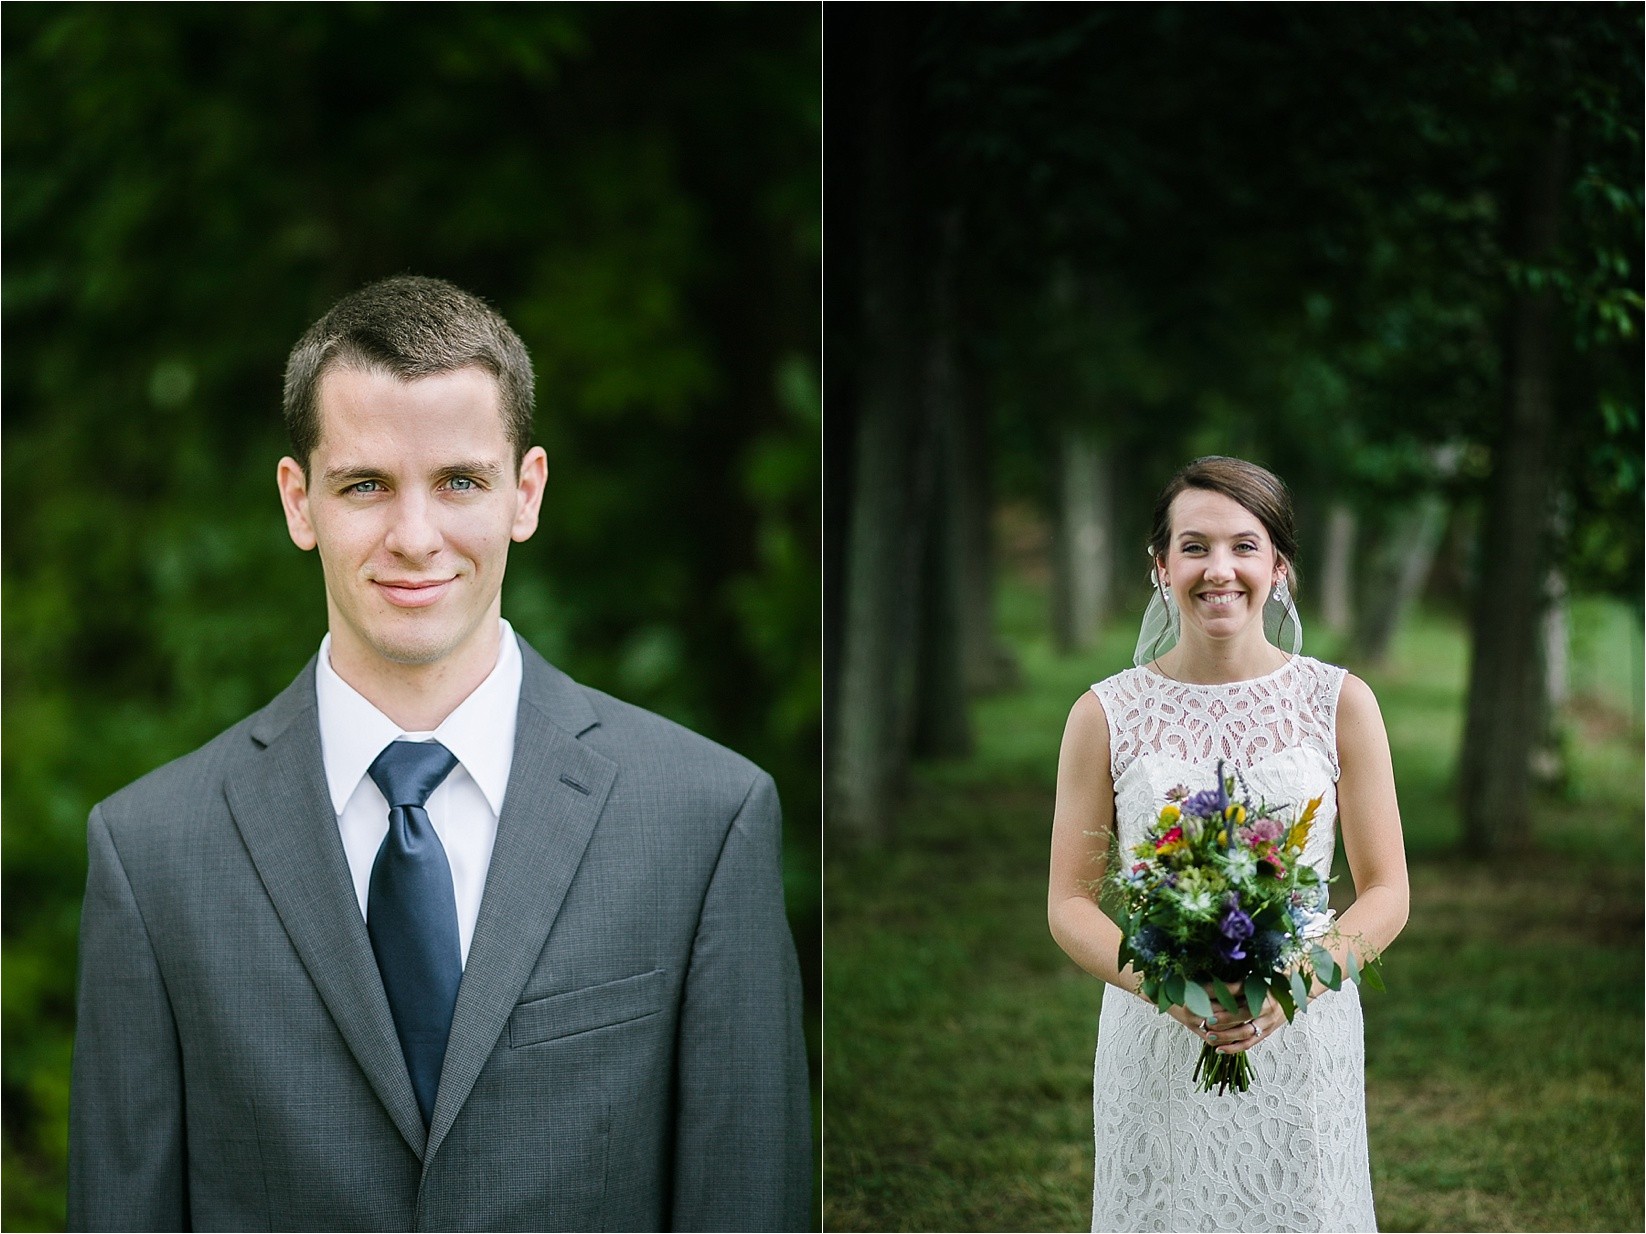 Portraits of bride and groom at Caroline and Evans mountain wedding at yesterday spaces in asheville leicester north carolina